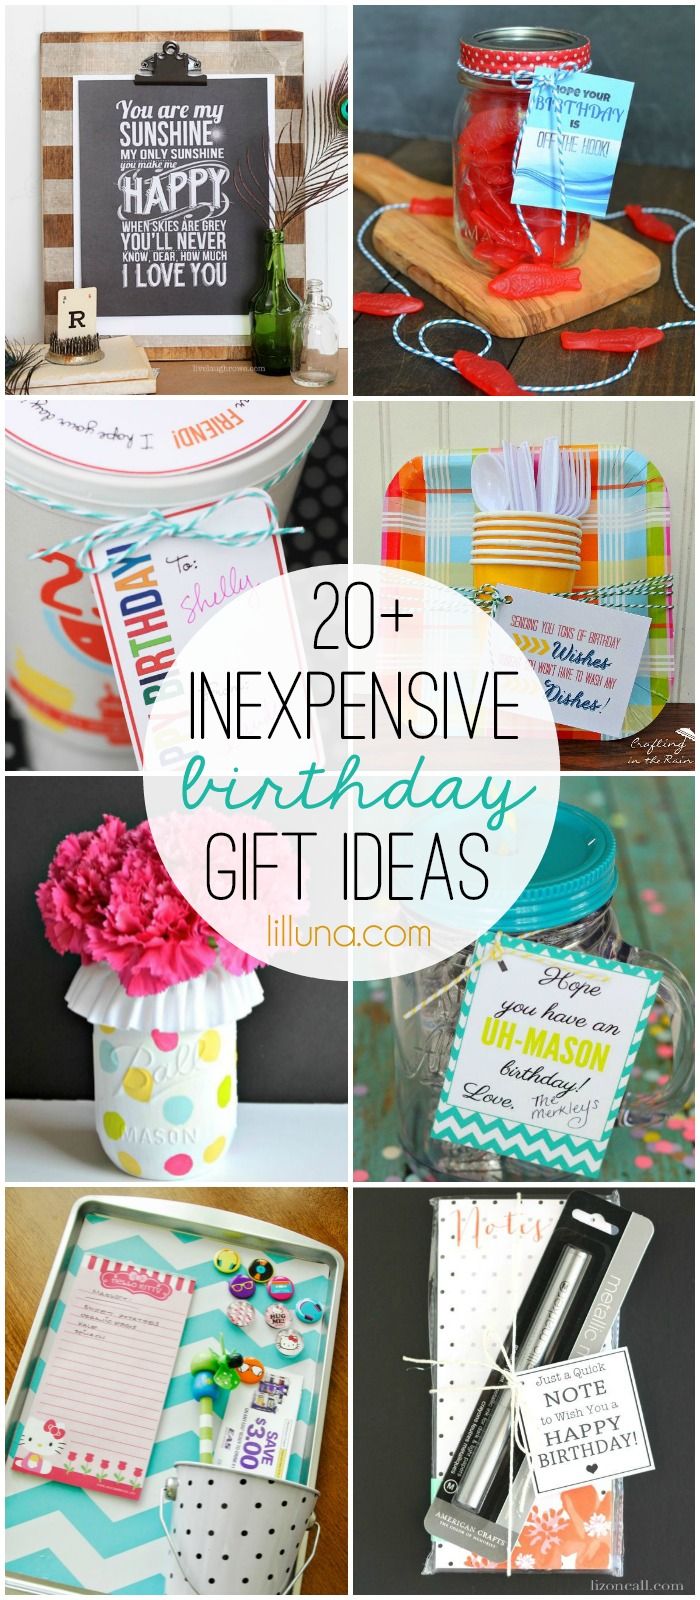 DIY gifts on a budget Ideas